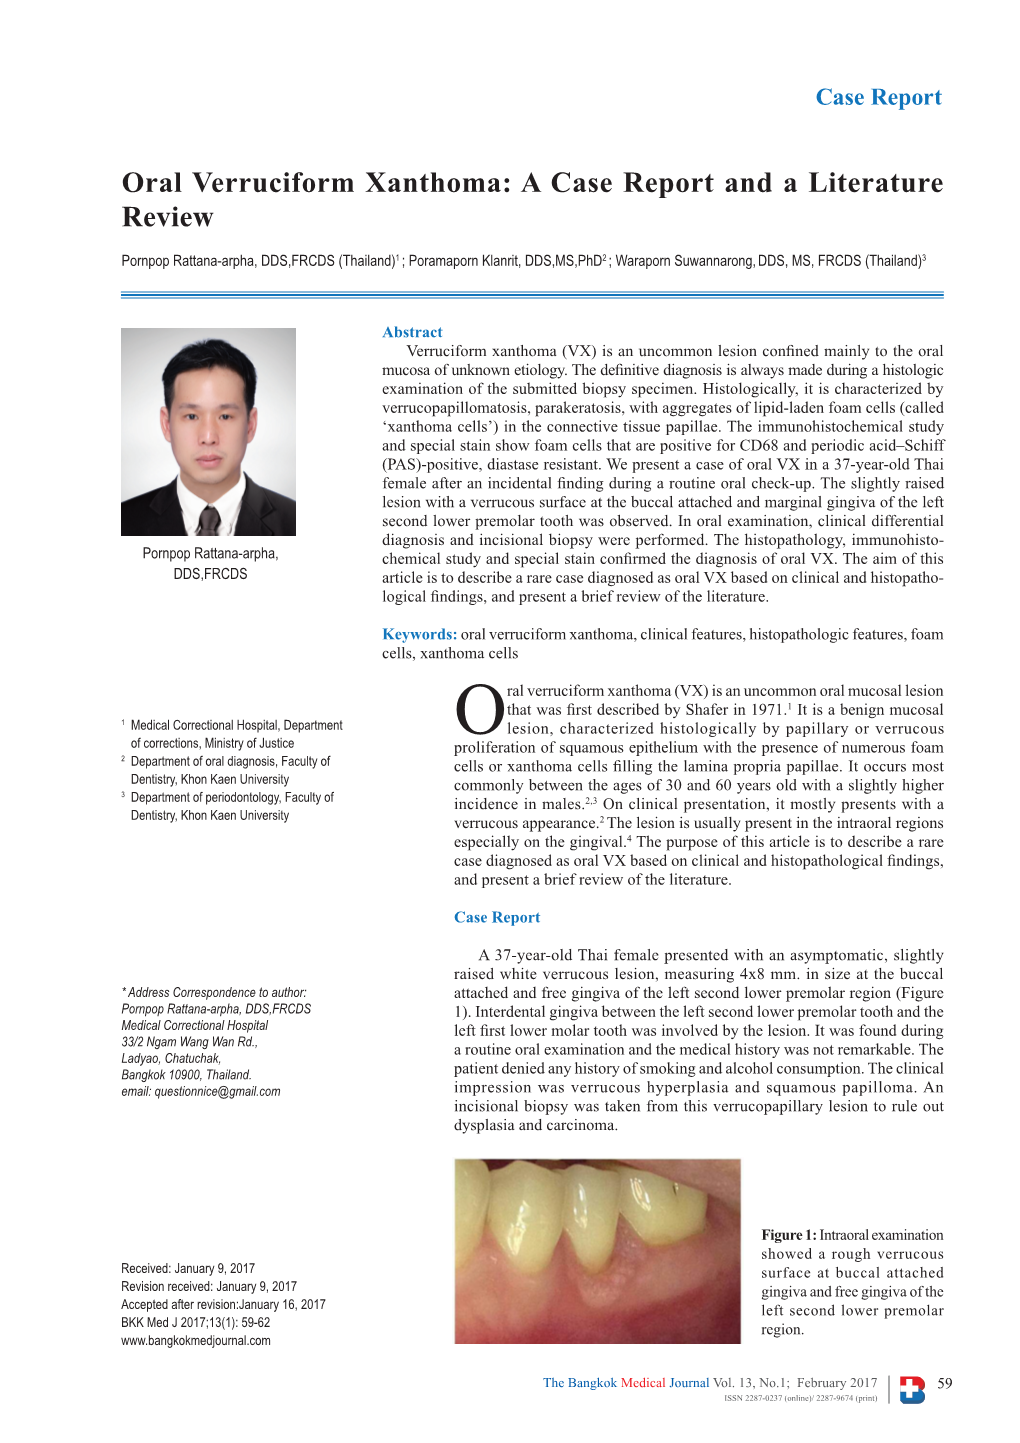 Oral Verruciform Xanthoma: a Case Report and a Literature Review